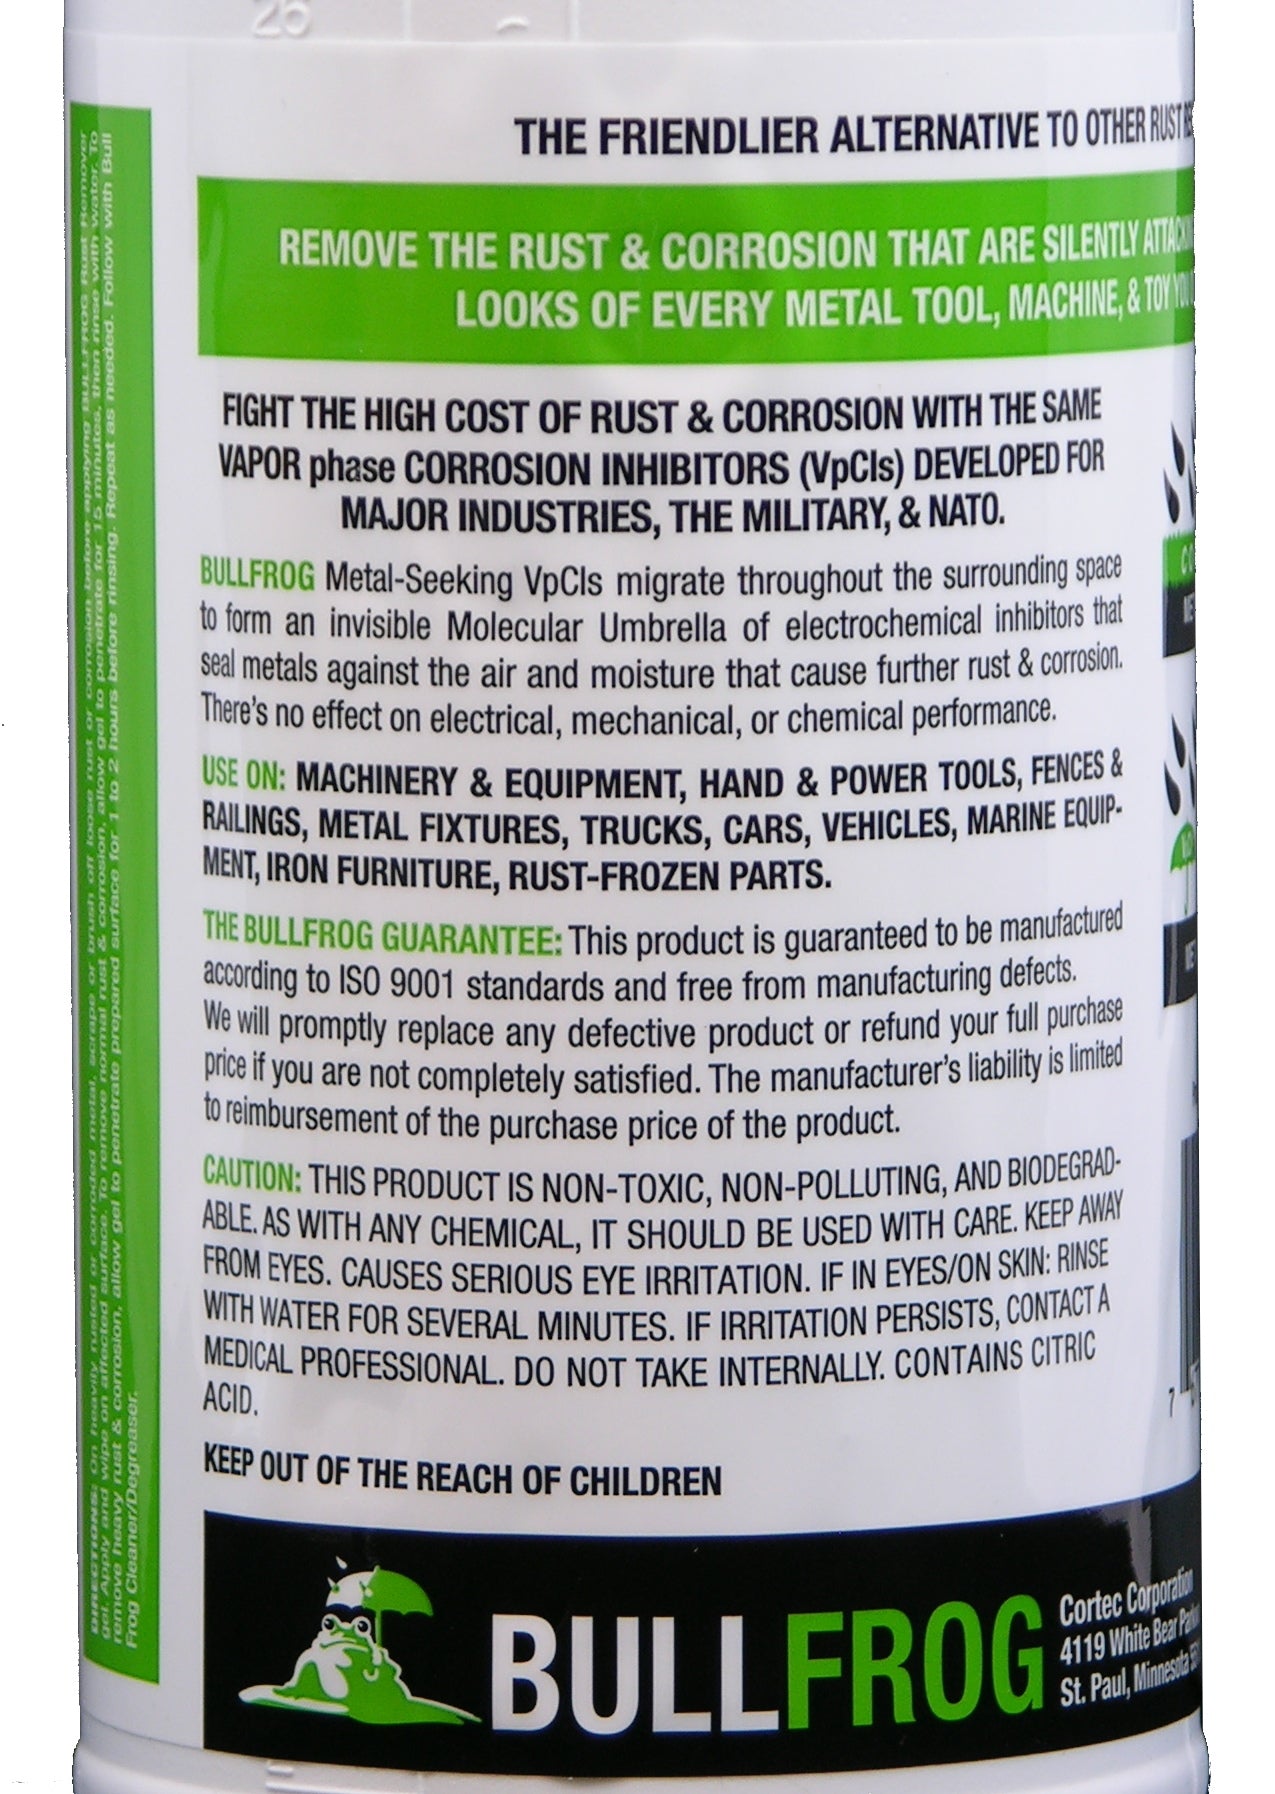 Bull Frog 94237 Non-Toxic Rust Remover Easy, Safe, Removes Rust, Corrosion, 32oz